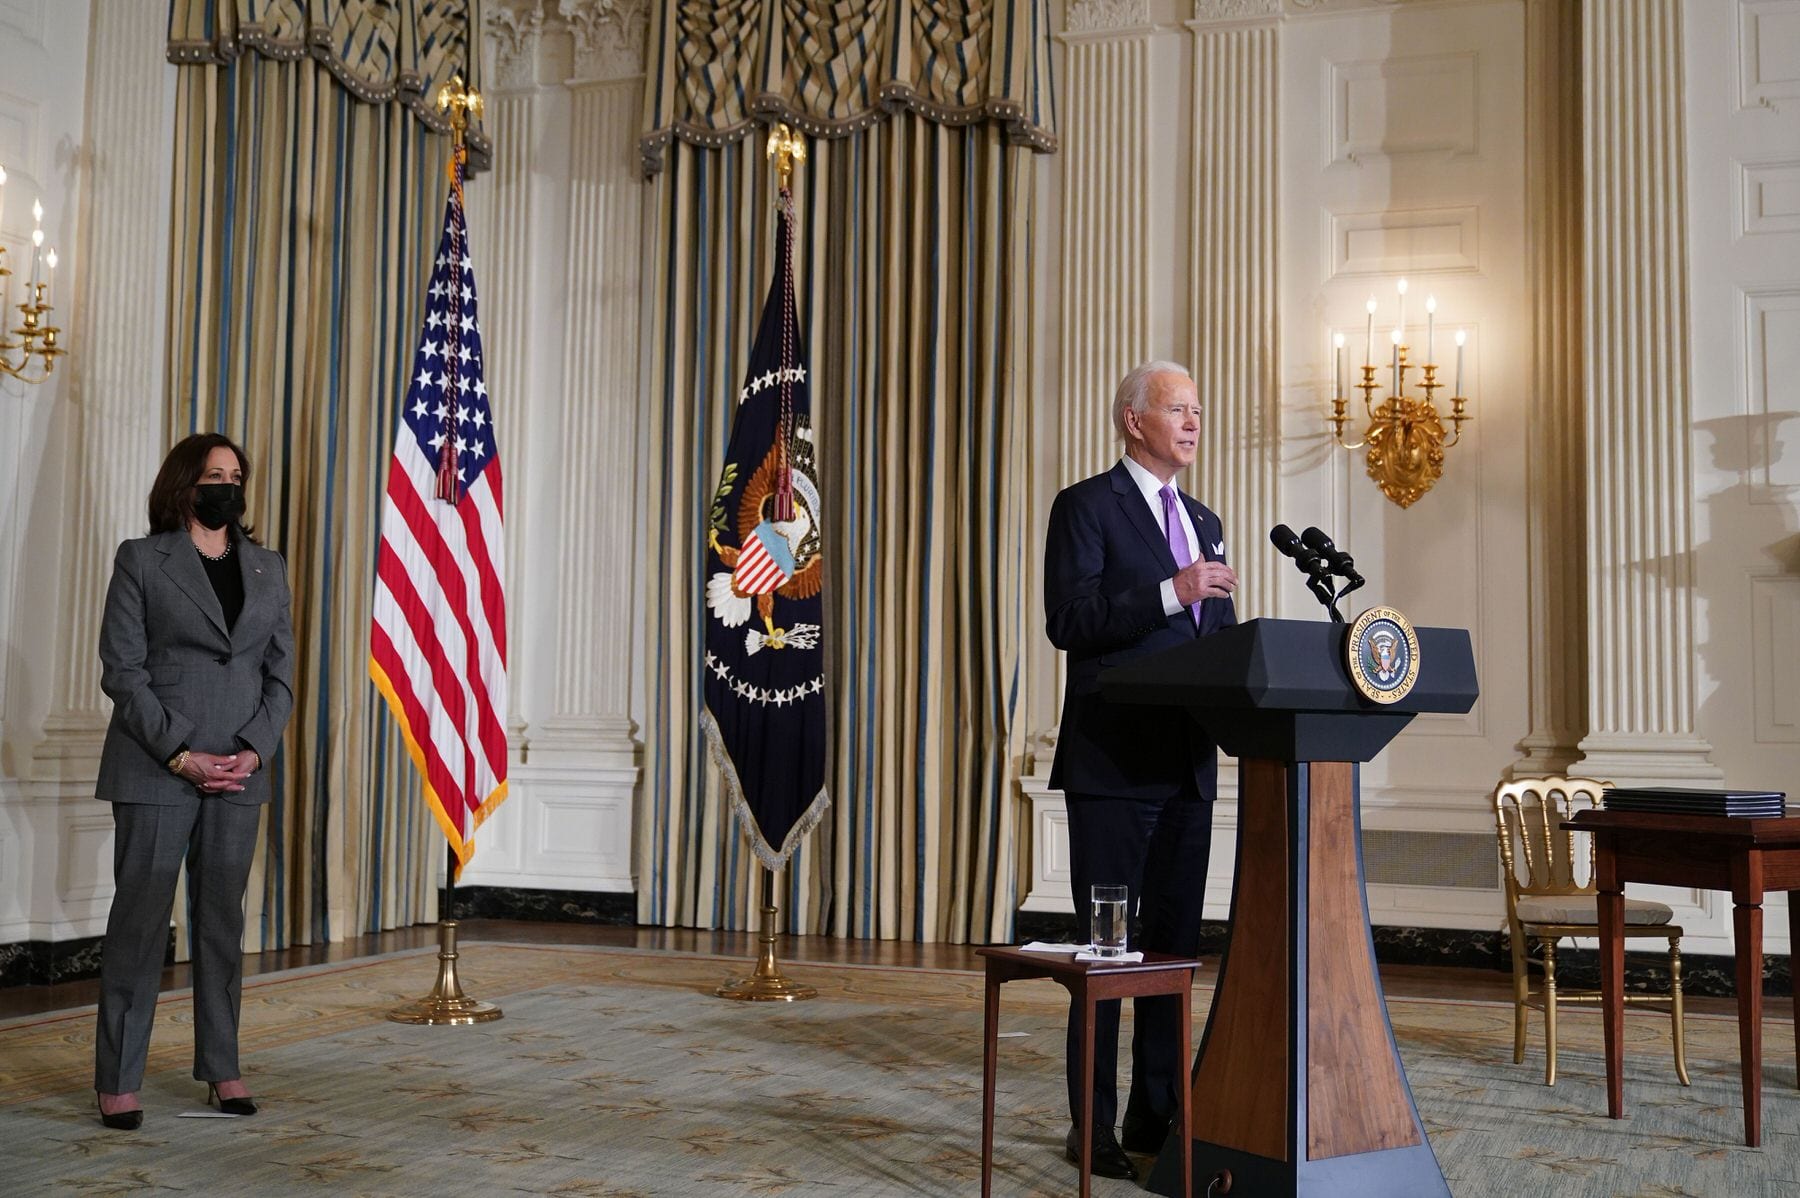 US Vice President Kamala Harris listens as US President Joe Biden speaks on racial equity at a podium in the White House state dining room.